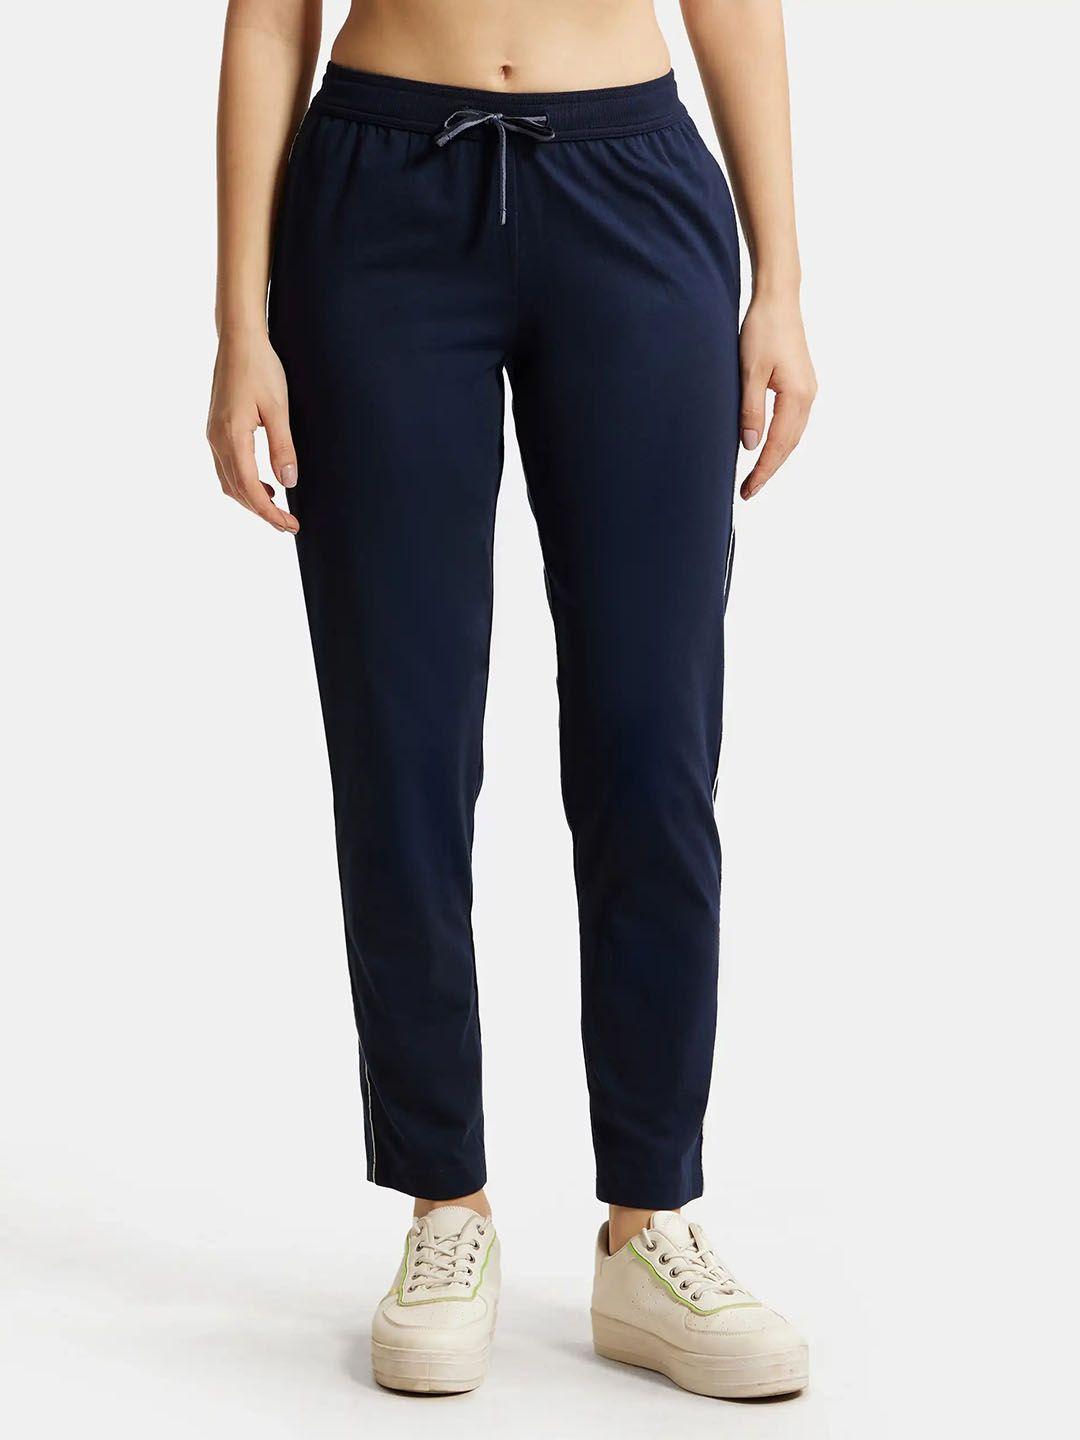 jockey-women-navy-blue-solid-relaxed-fit-track-pant